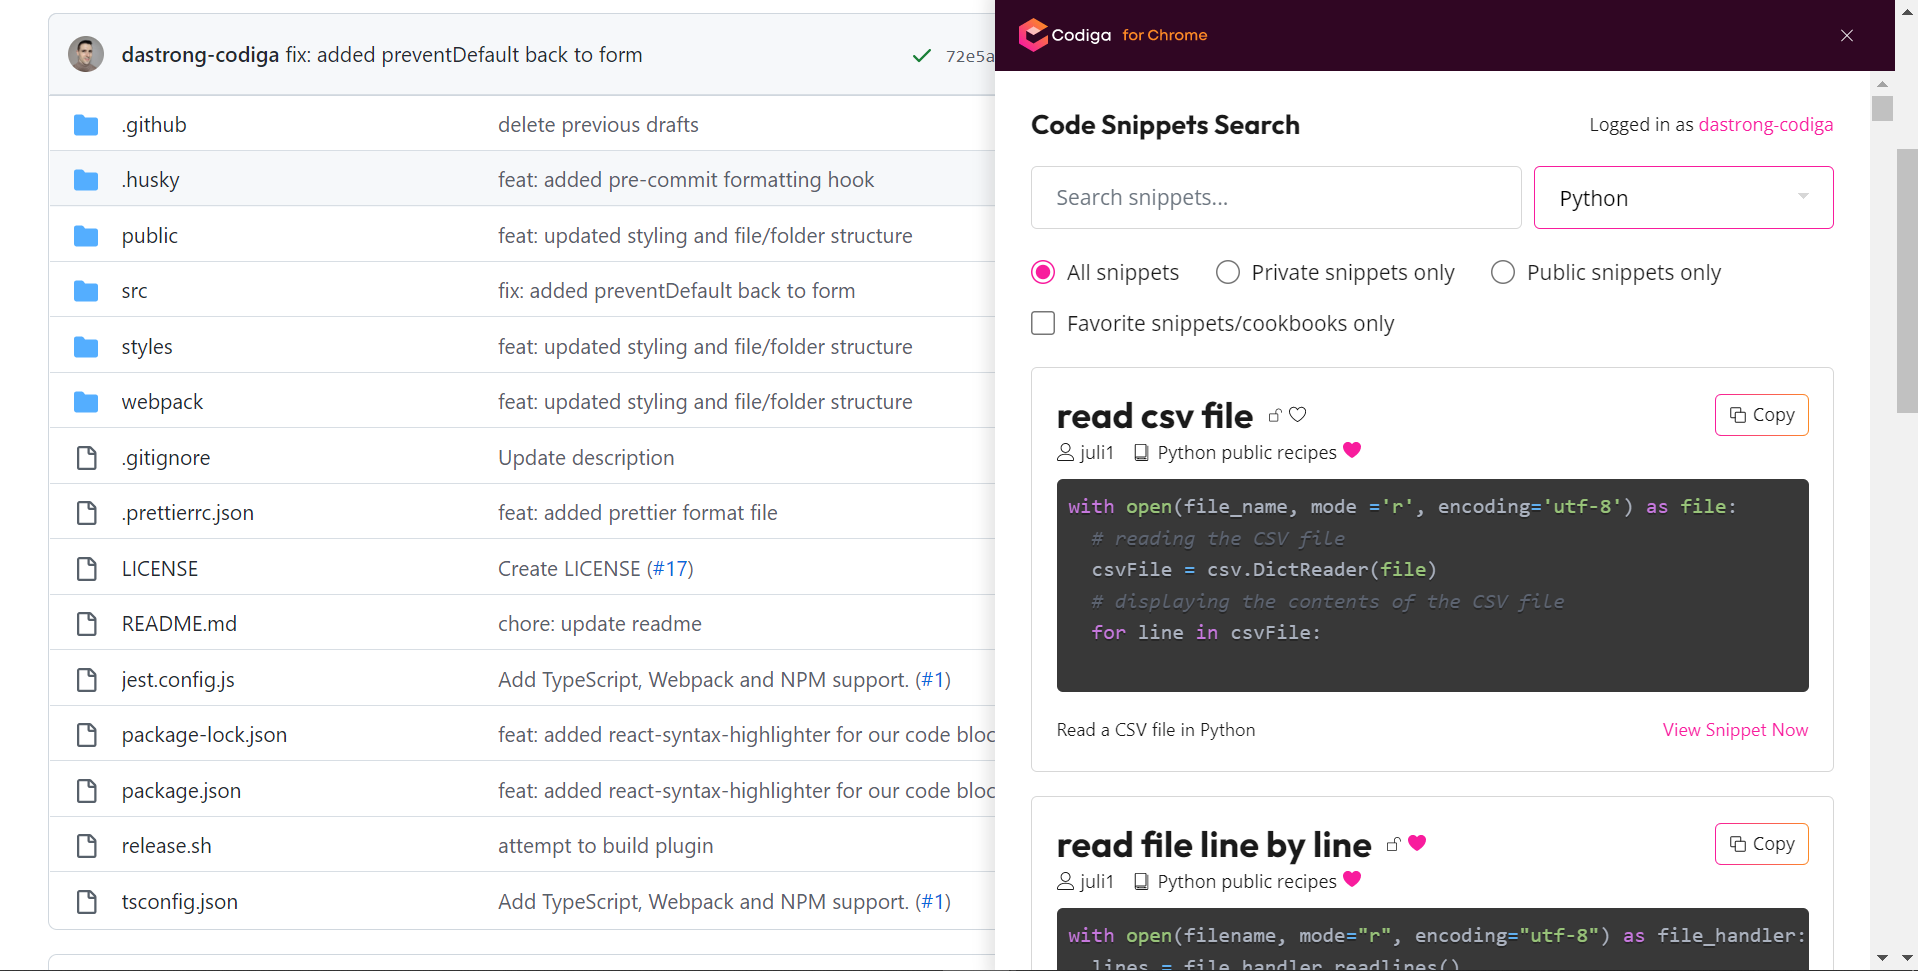 Open Code Snippet Search Panel